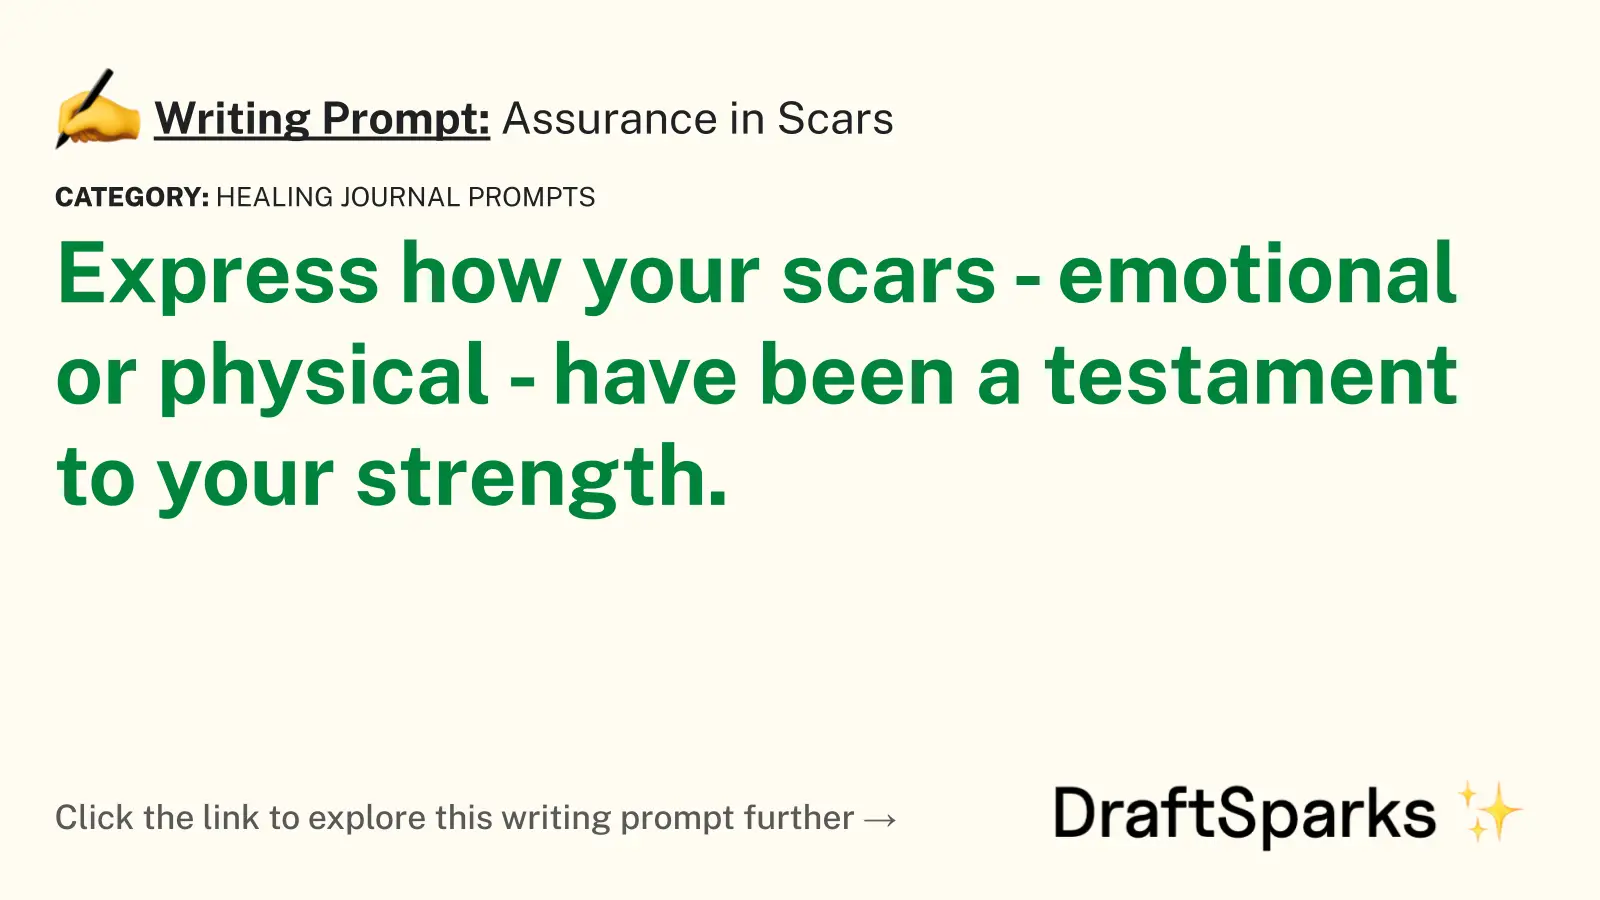 Assurance in Scars